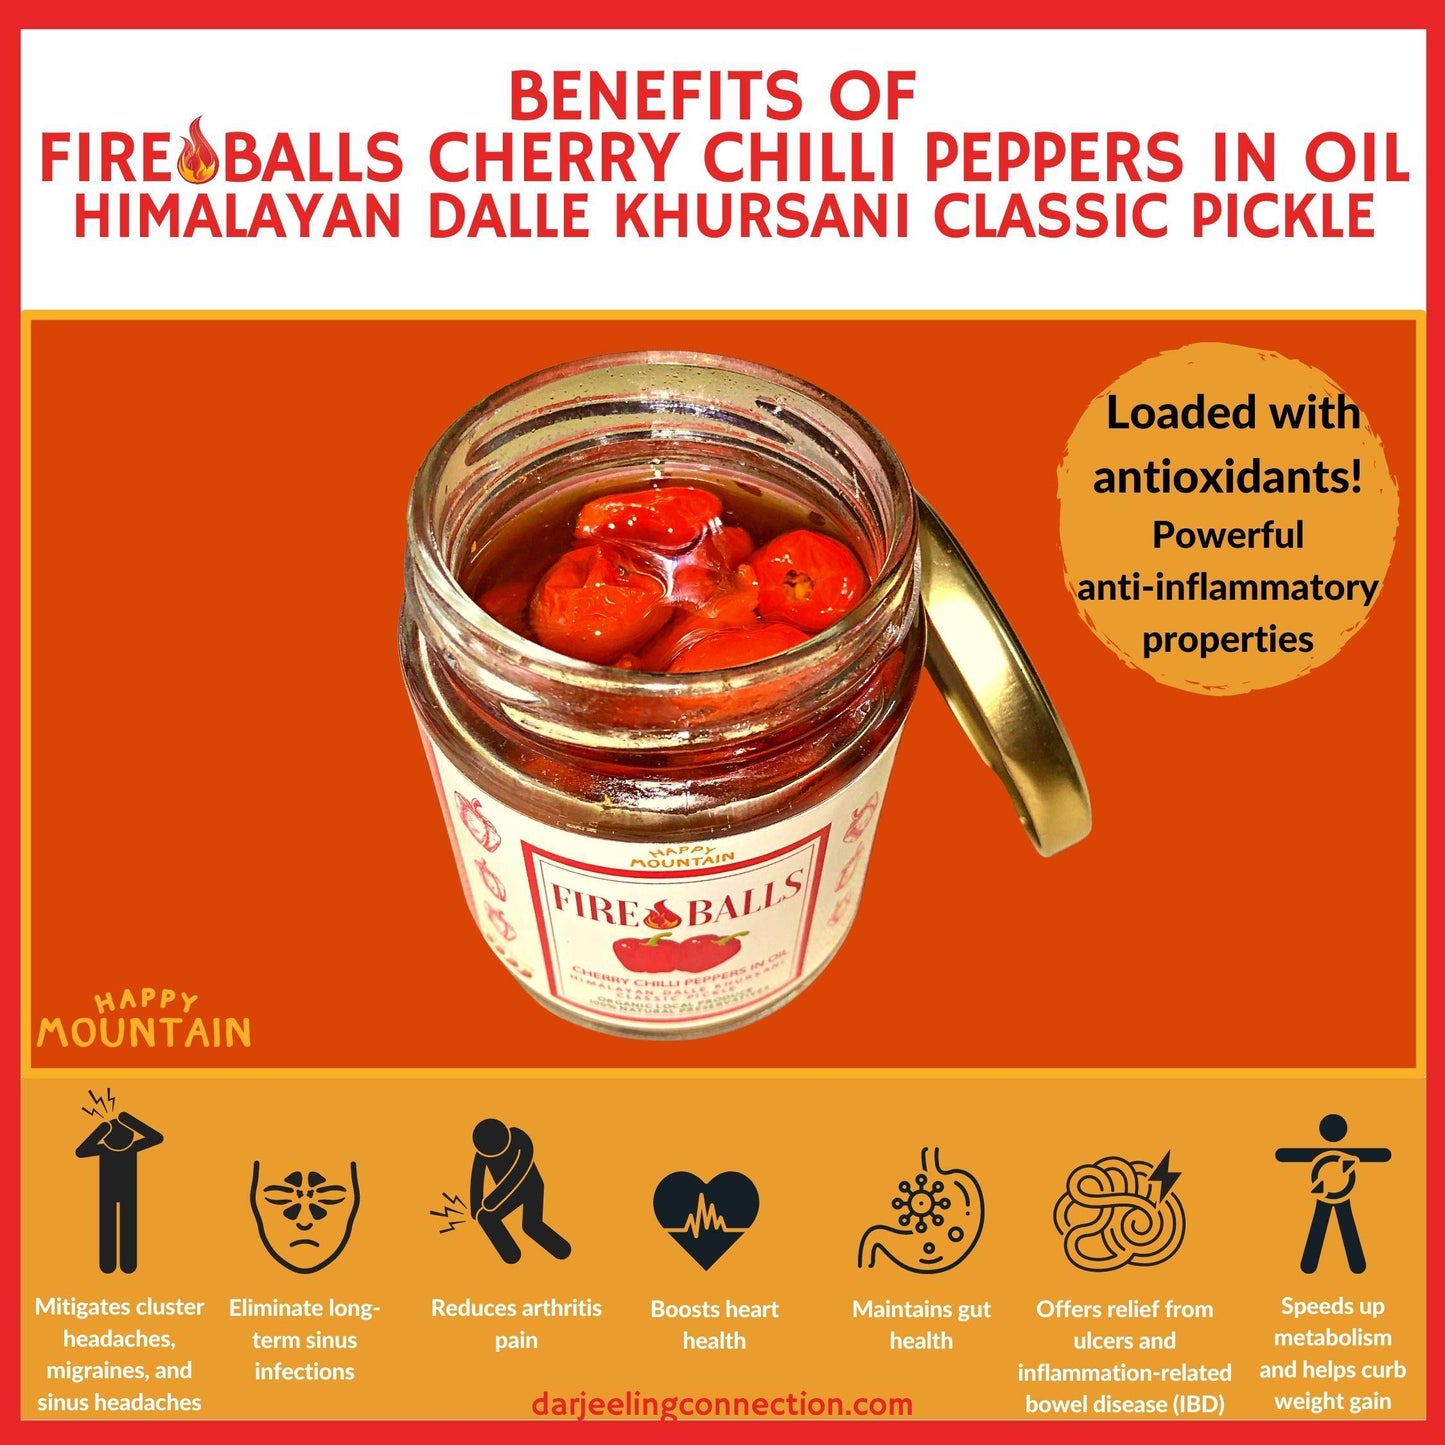 Benefits of Fireballs - Cherry Chilli Peppers (Dalle) in Oil - Happy Mountain